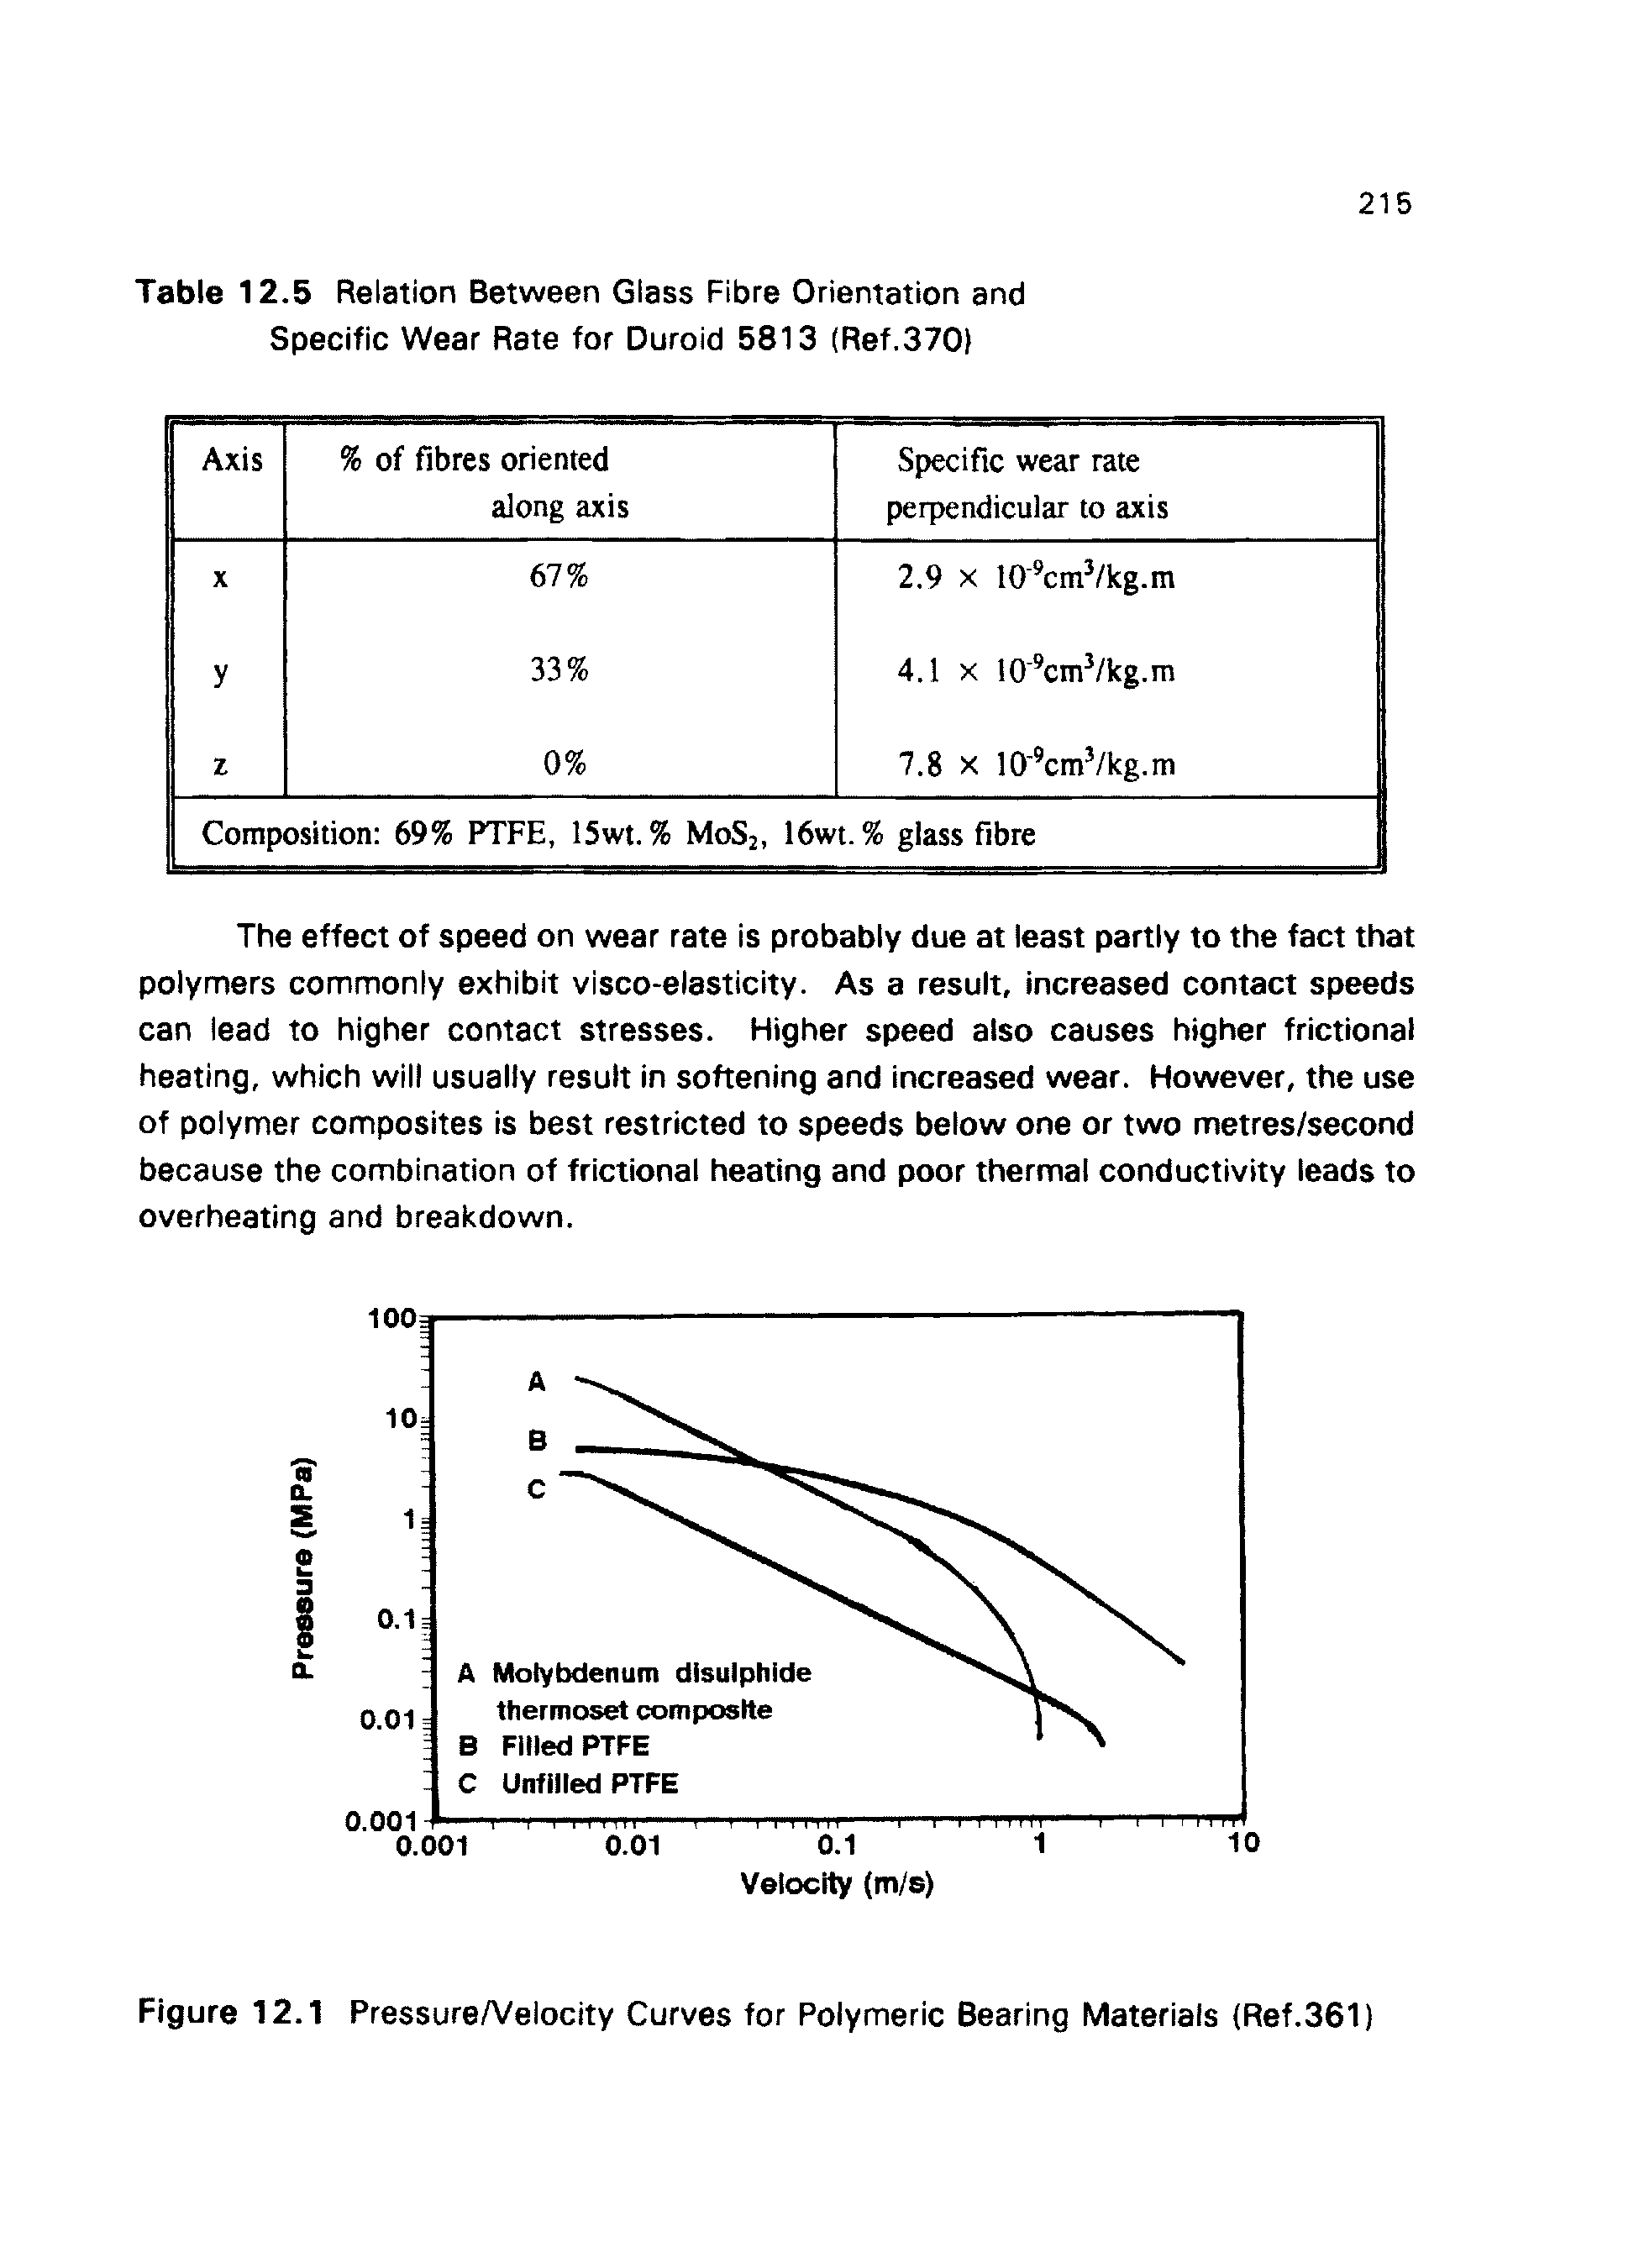 Table 12.5 Relation Between Glass Fibre Orientation and Specific Wear Rate for Duroid 5813 (Ref.370 ...